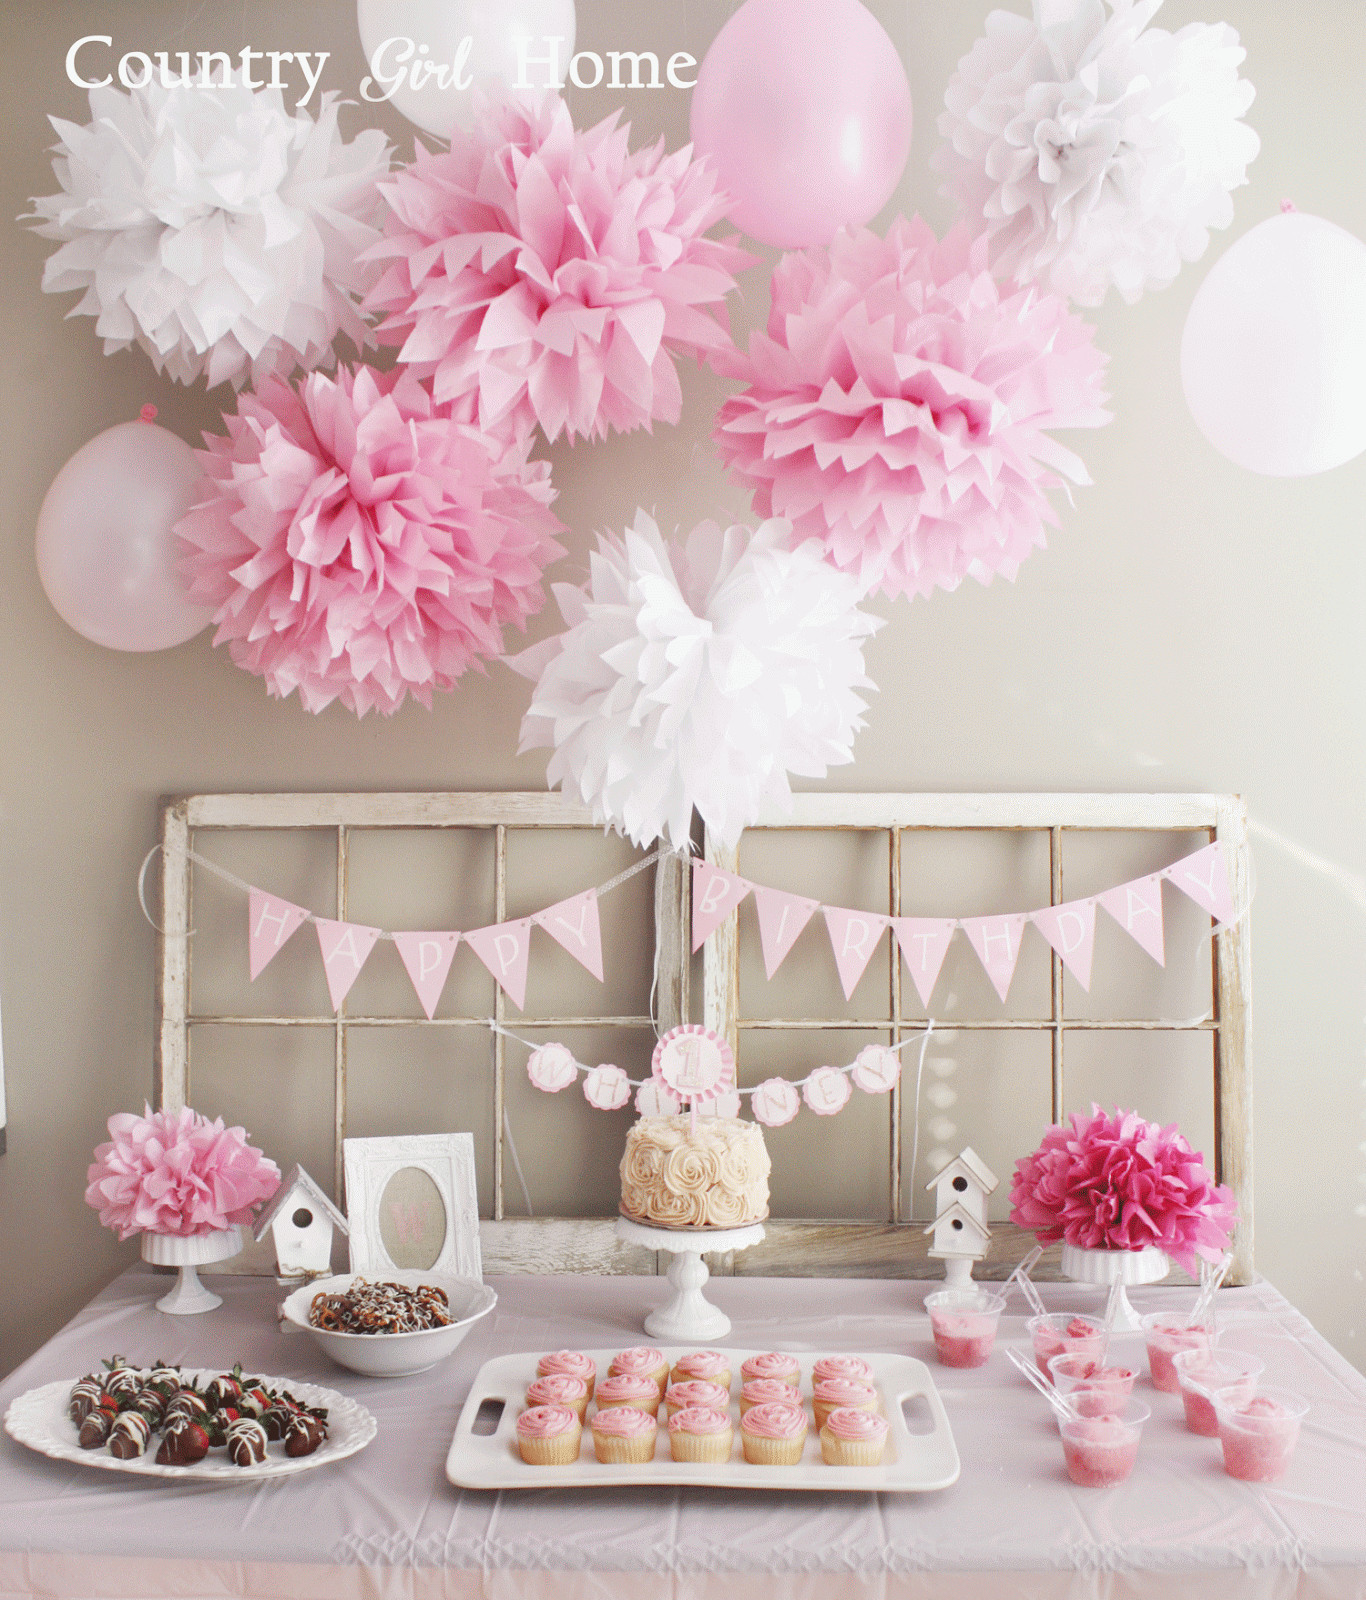 Best ideas about 1st Birthday Decorations
. Save or Pin COUNTRY GIRL HOME 1st Birthday Now.